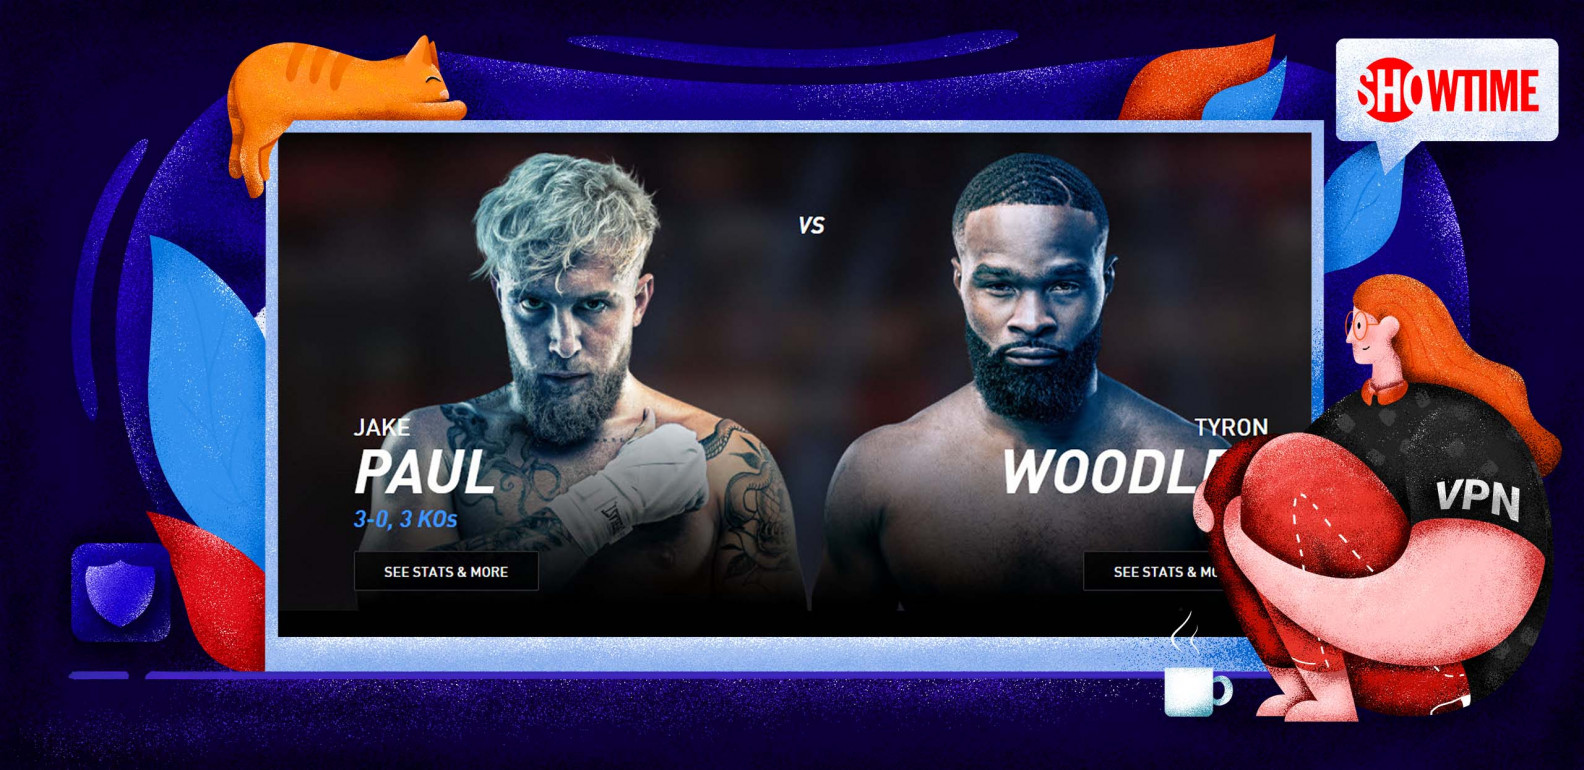 How to stream Jake Paul vs Tyron Woodley in India